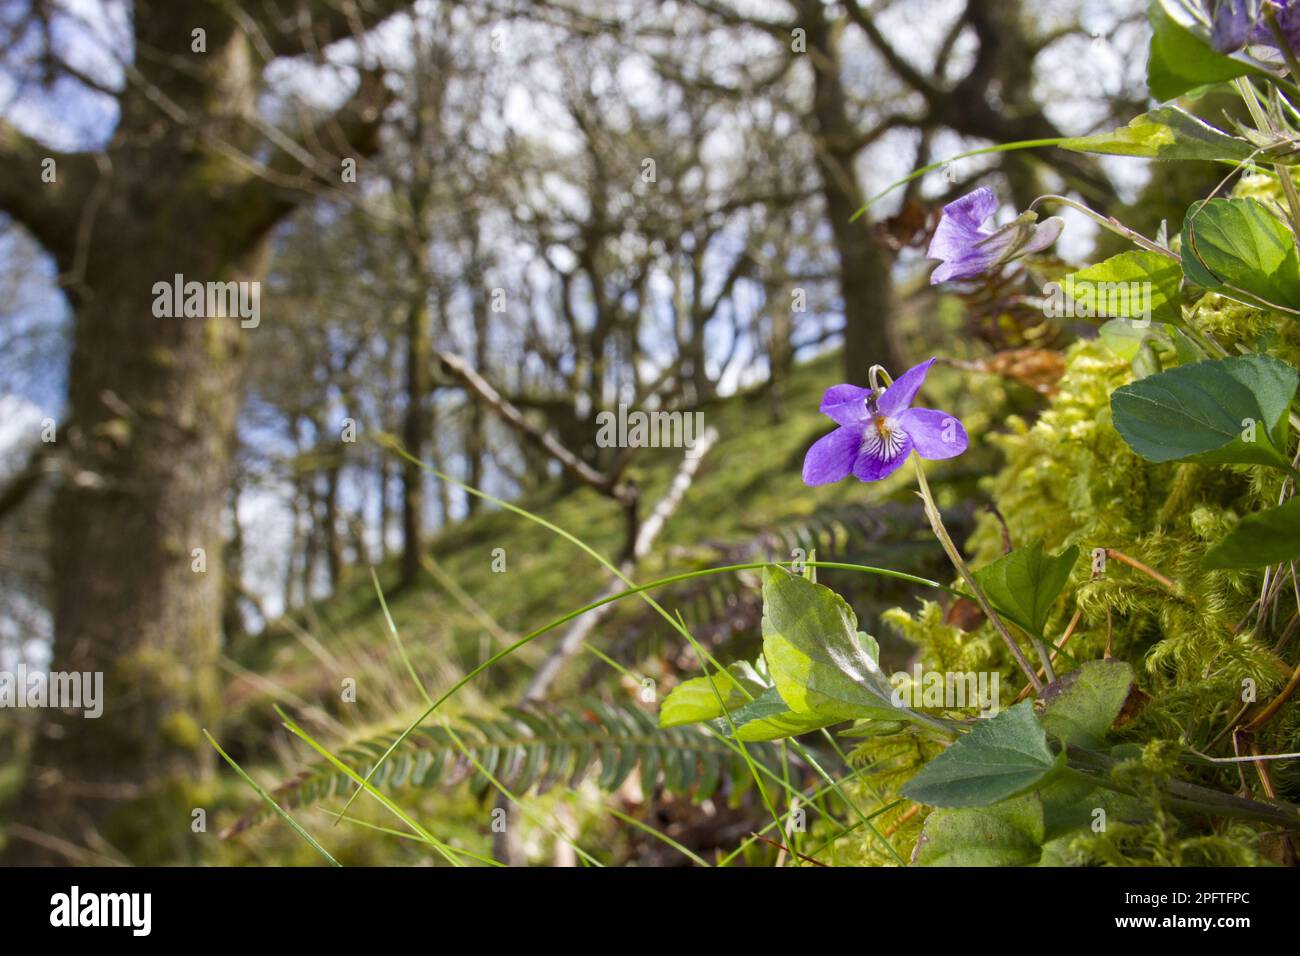 Wood violet (Viola riviniana) flowering, growing in oak woodland (Quercus sp.), Powys, Wales, United Kingdom Stock Photo